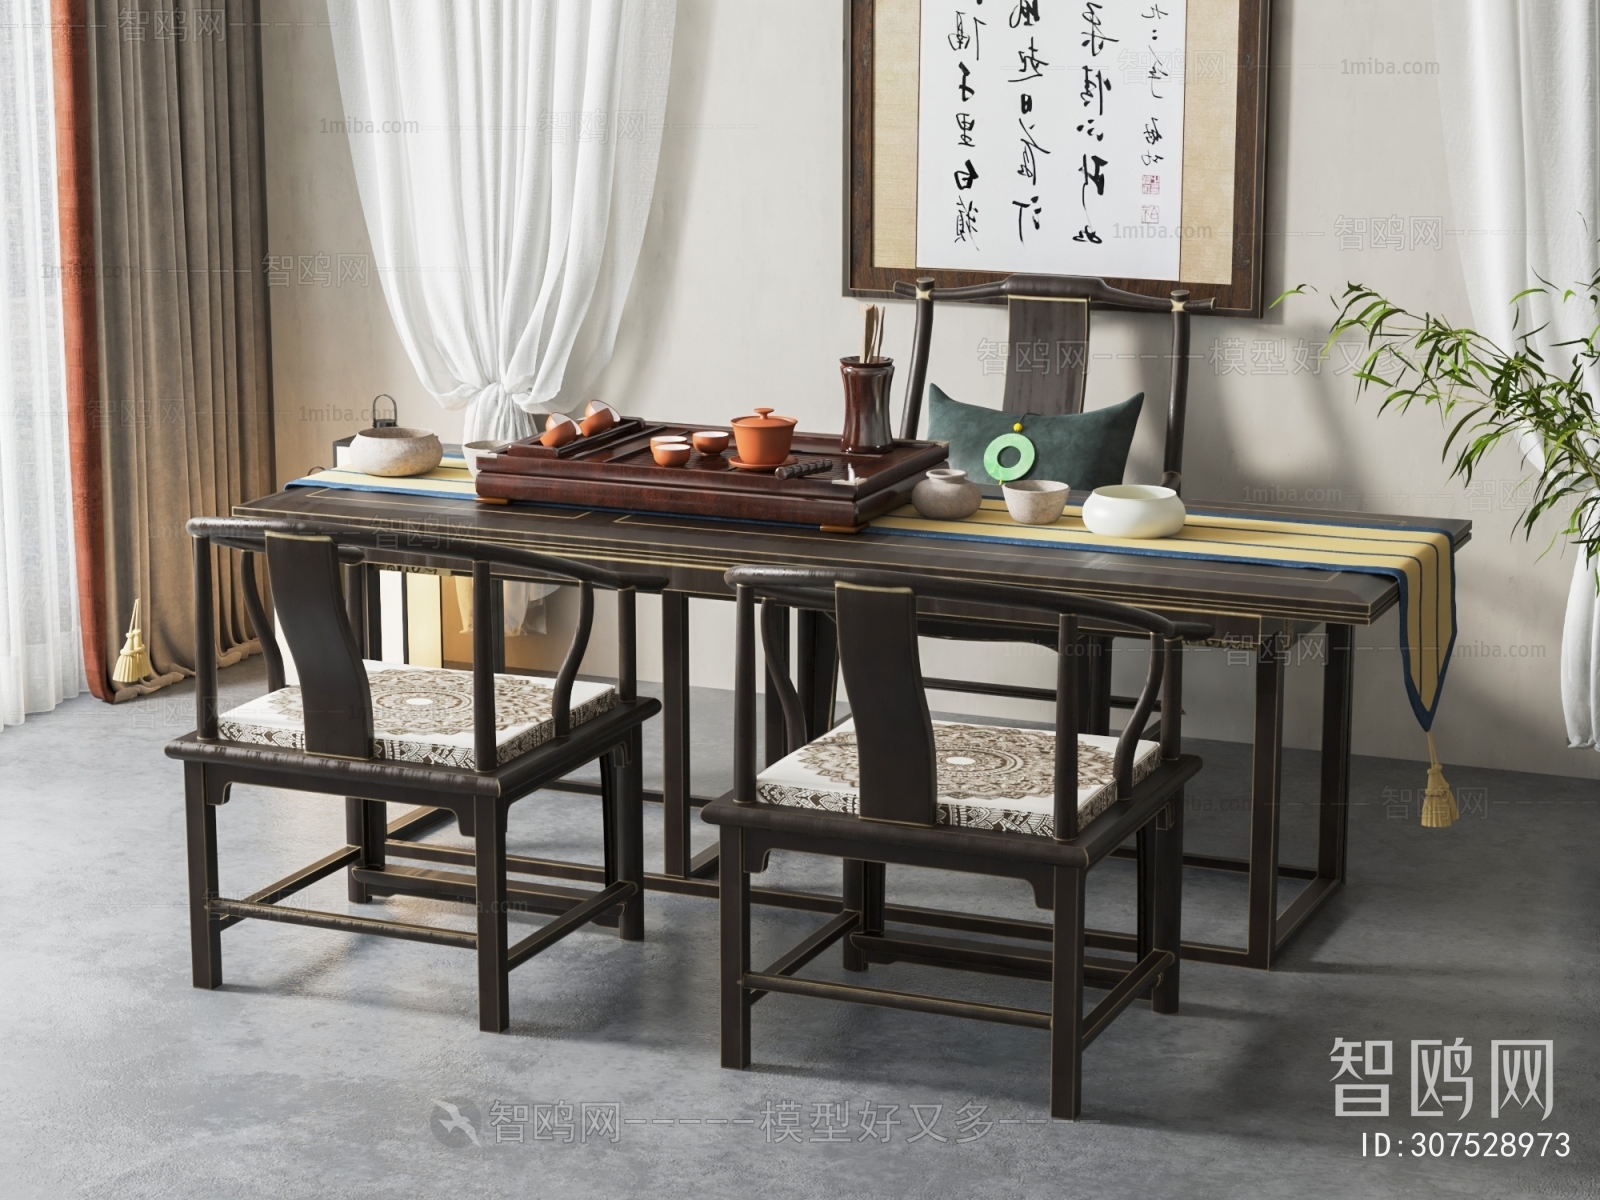 Chinese Style Tea Tables And Chairs